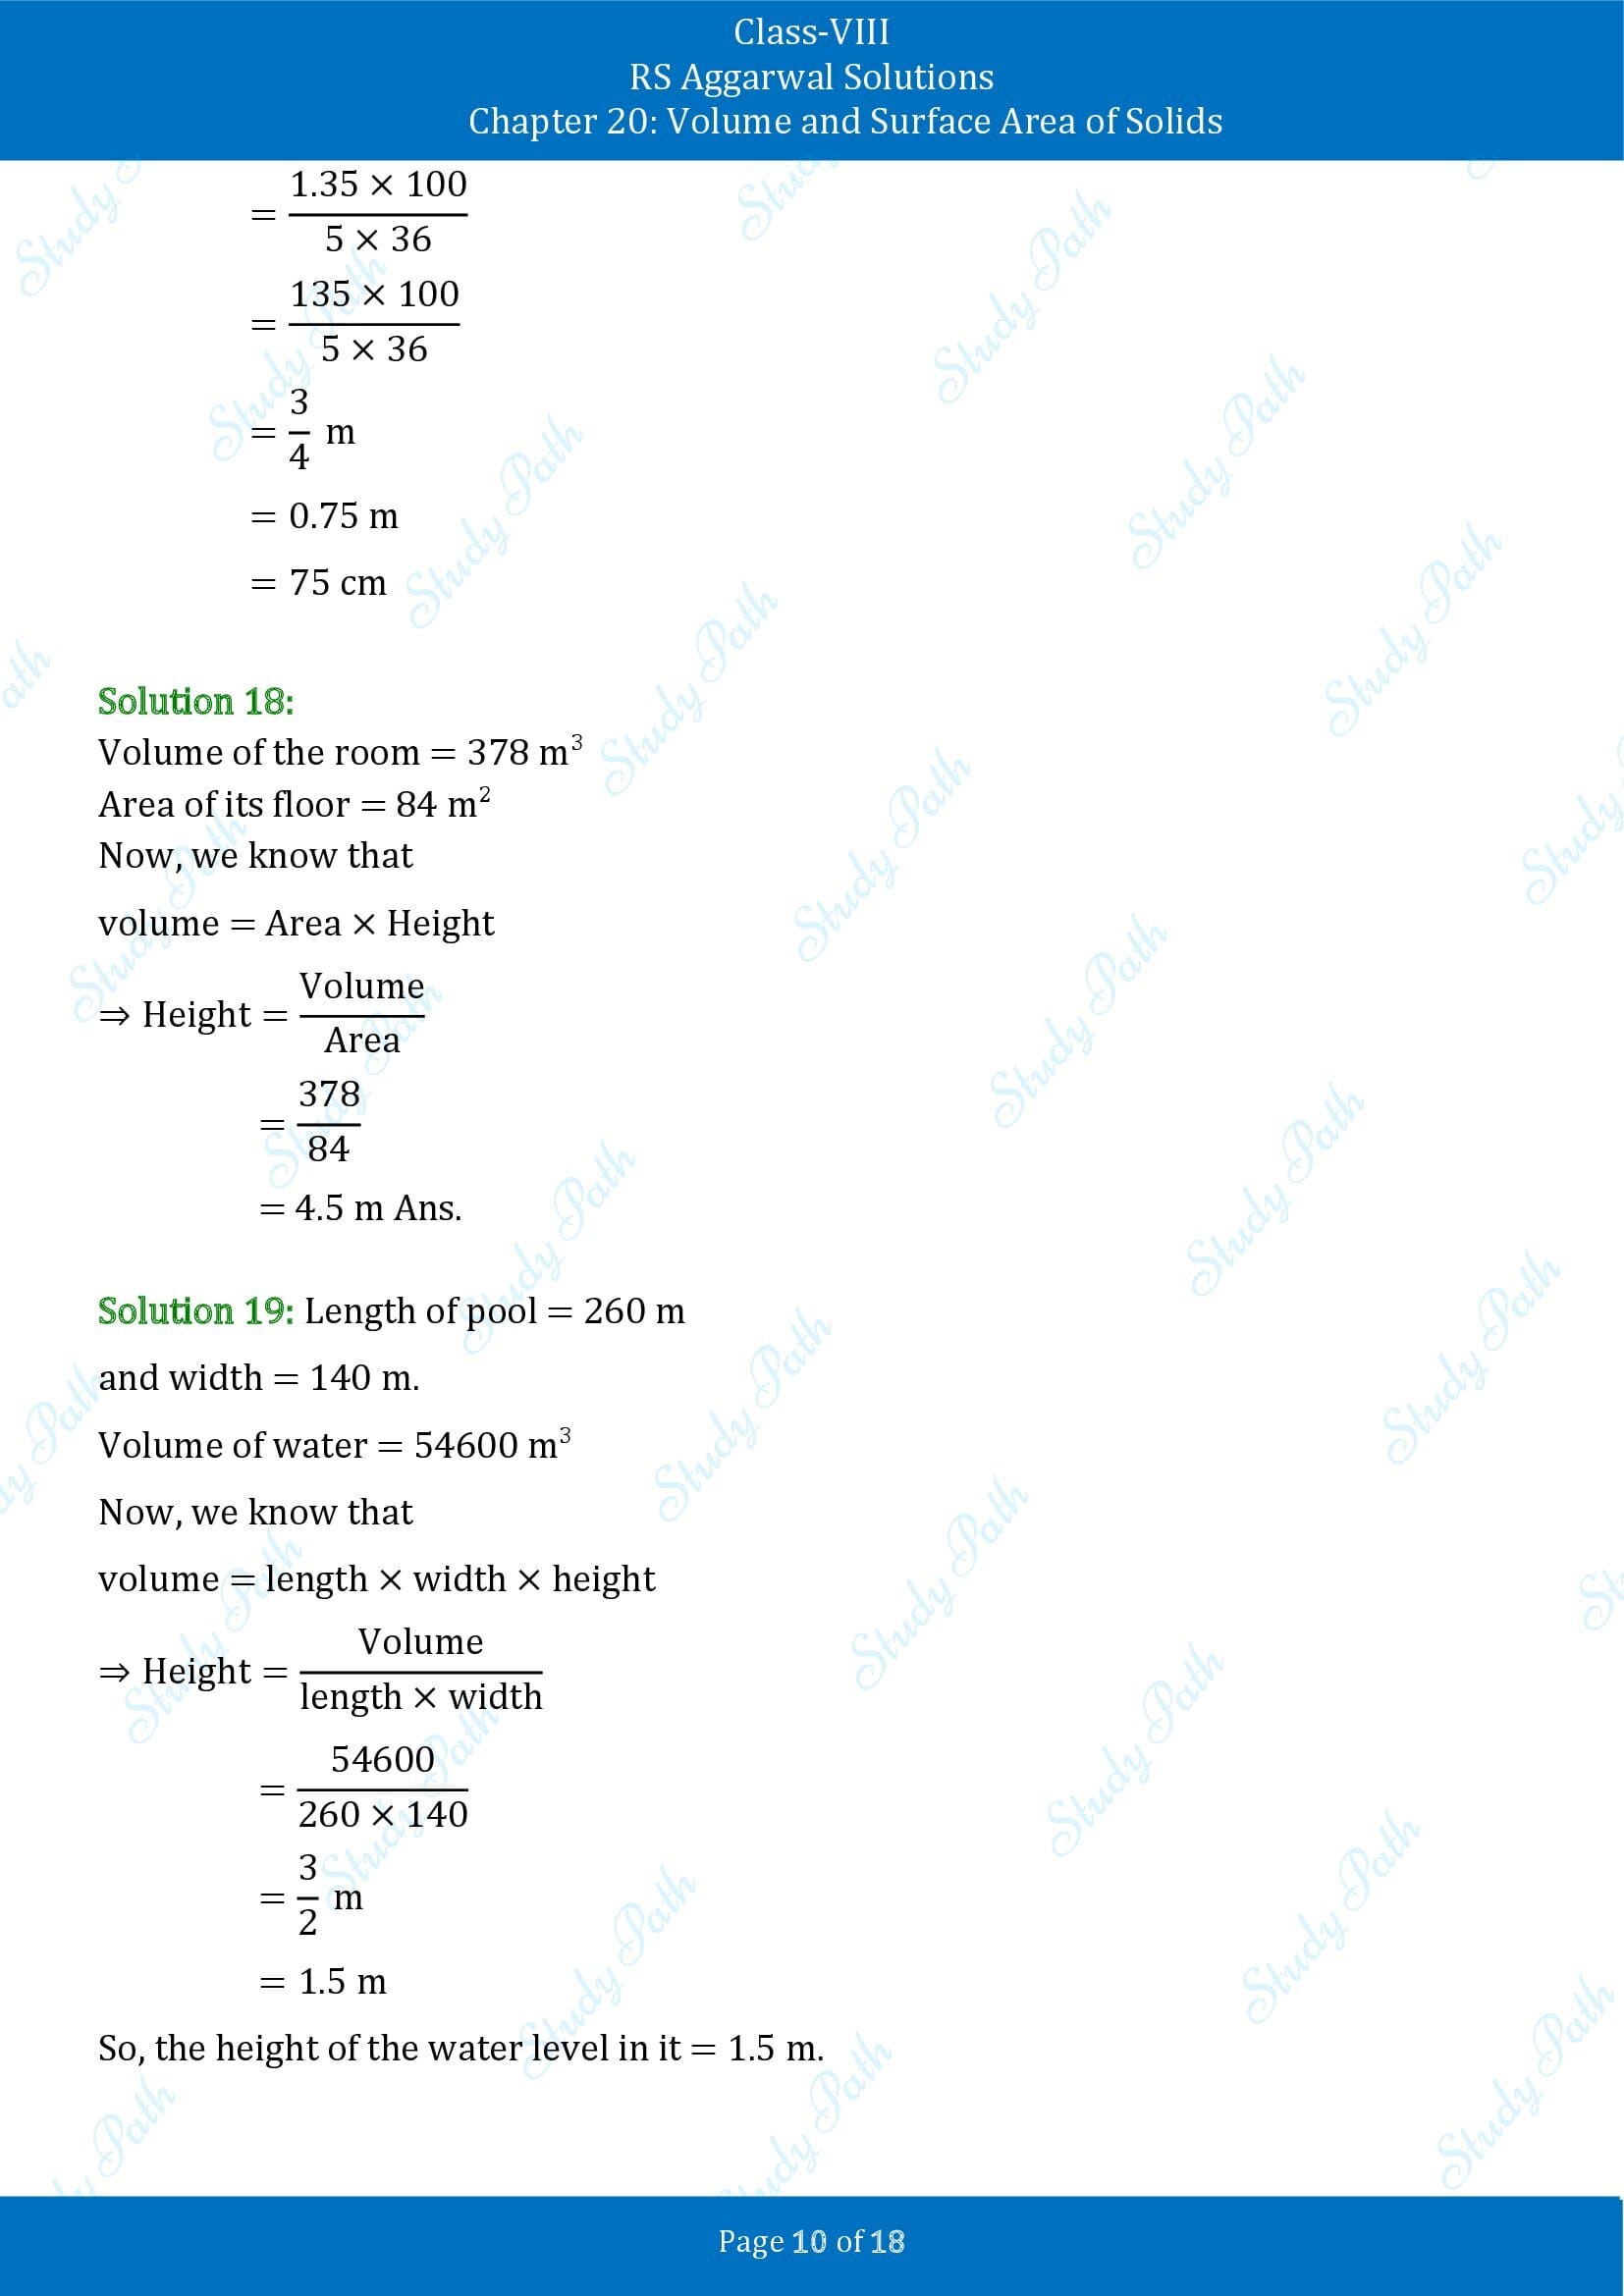 RS Aggarwal Solutions Class 8 Chapter 20 Volume and Surface Area of Solids Exercise 20A 00010